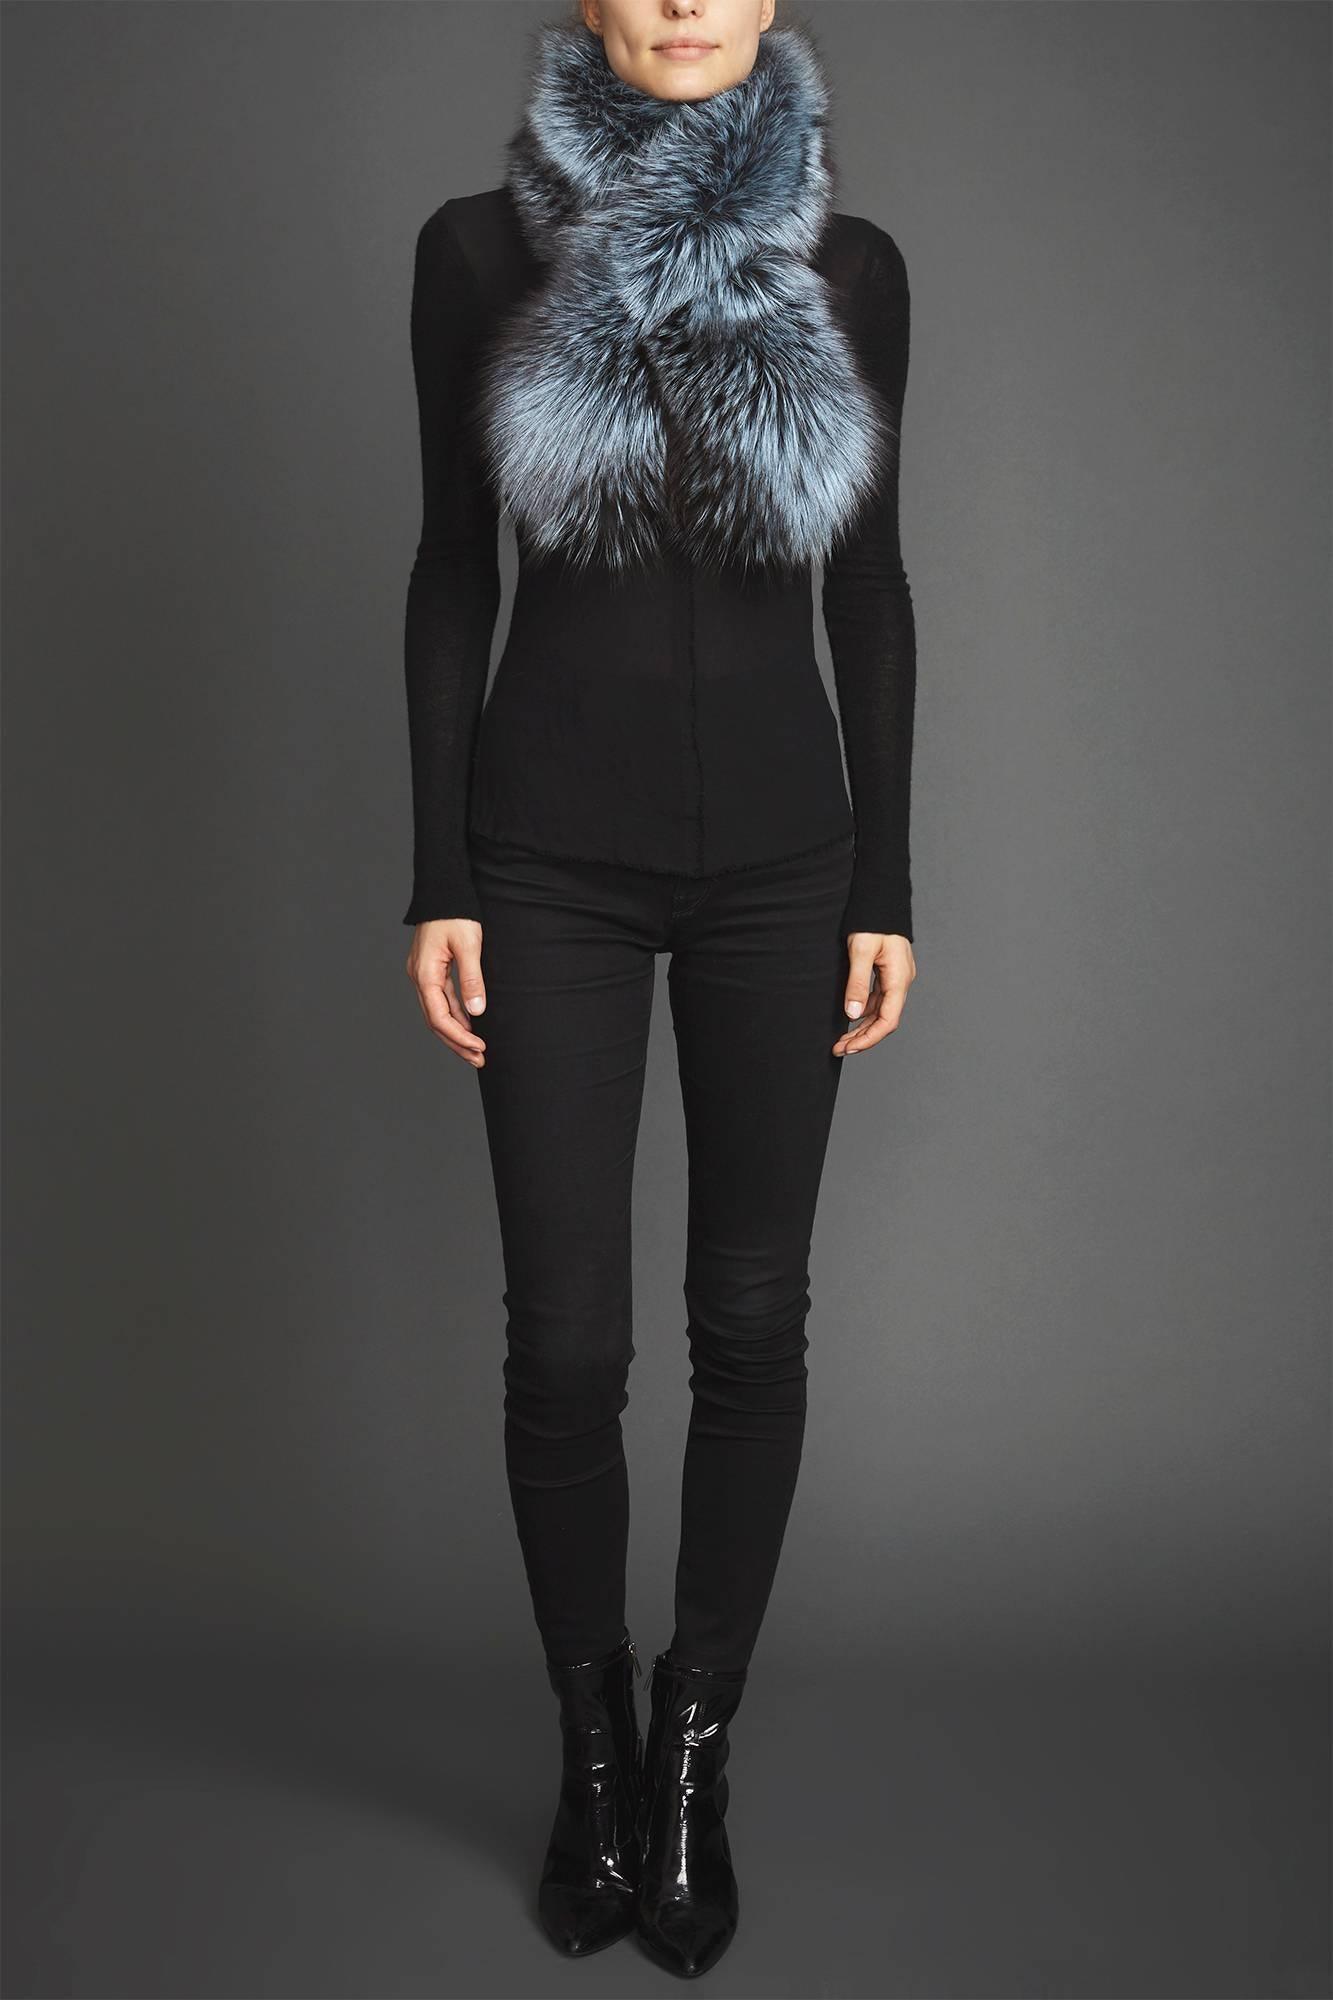 Verheyen Lapel Cross-through Collar in Iced Topaz Fox Fur - Brand New 

The Lapel Cross-through Collar is Verheyen London’s casual everyday design, which is perfectly shaped to wear over any outfit. Designed for layering, this structured shape,